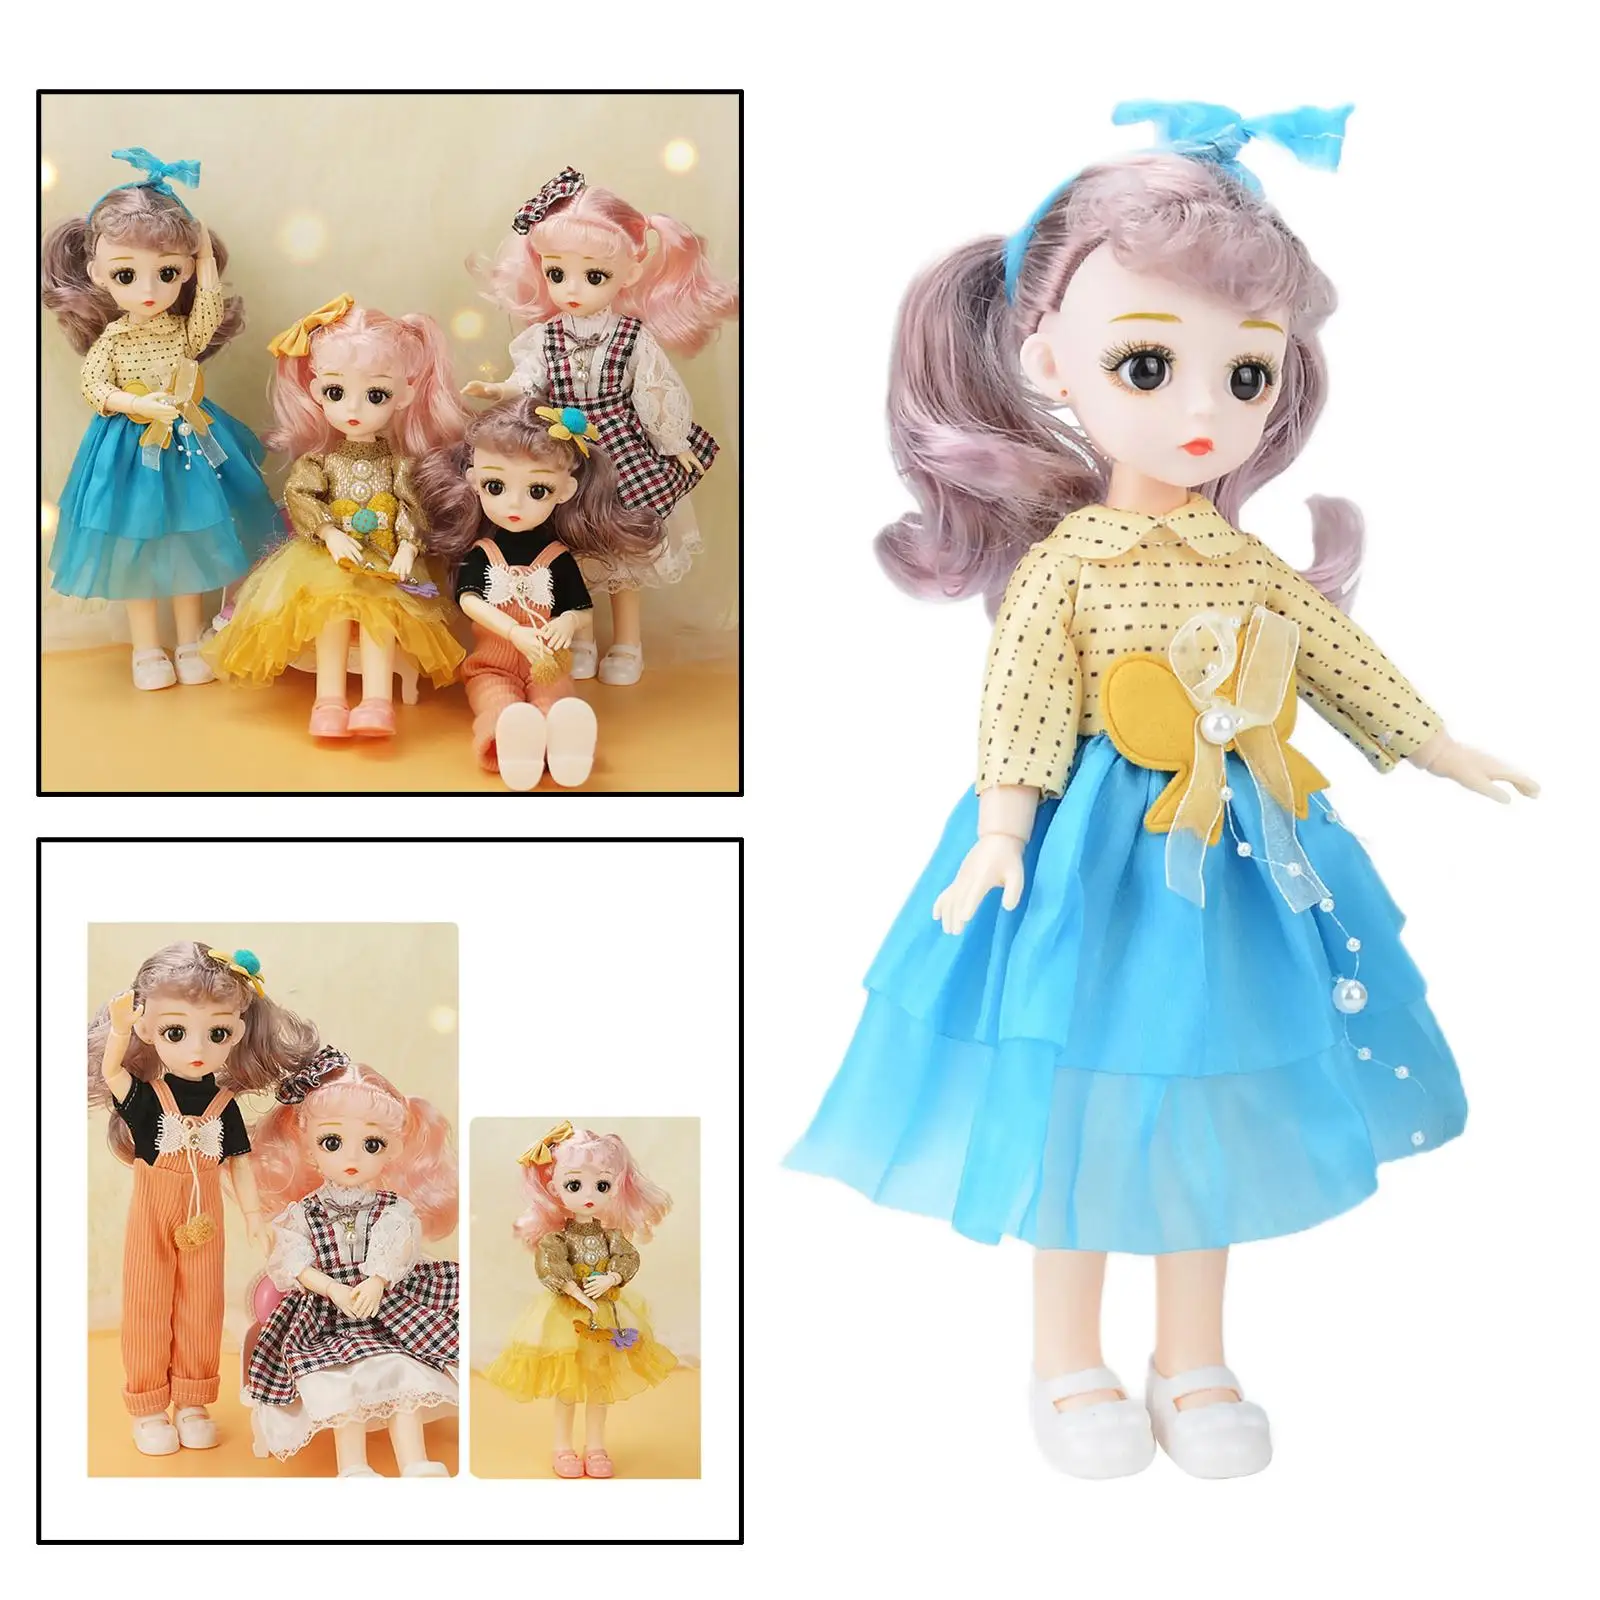 Adorable 12inch Doll Girl Doll 11 Flexible Joint Ball Joint Dolls Fashion Doll for Kids Toys with Dress Play Doll